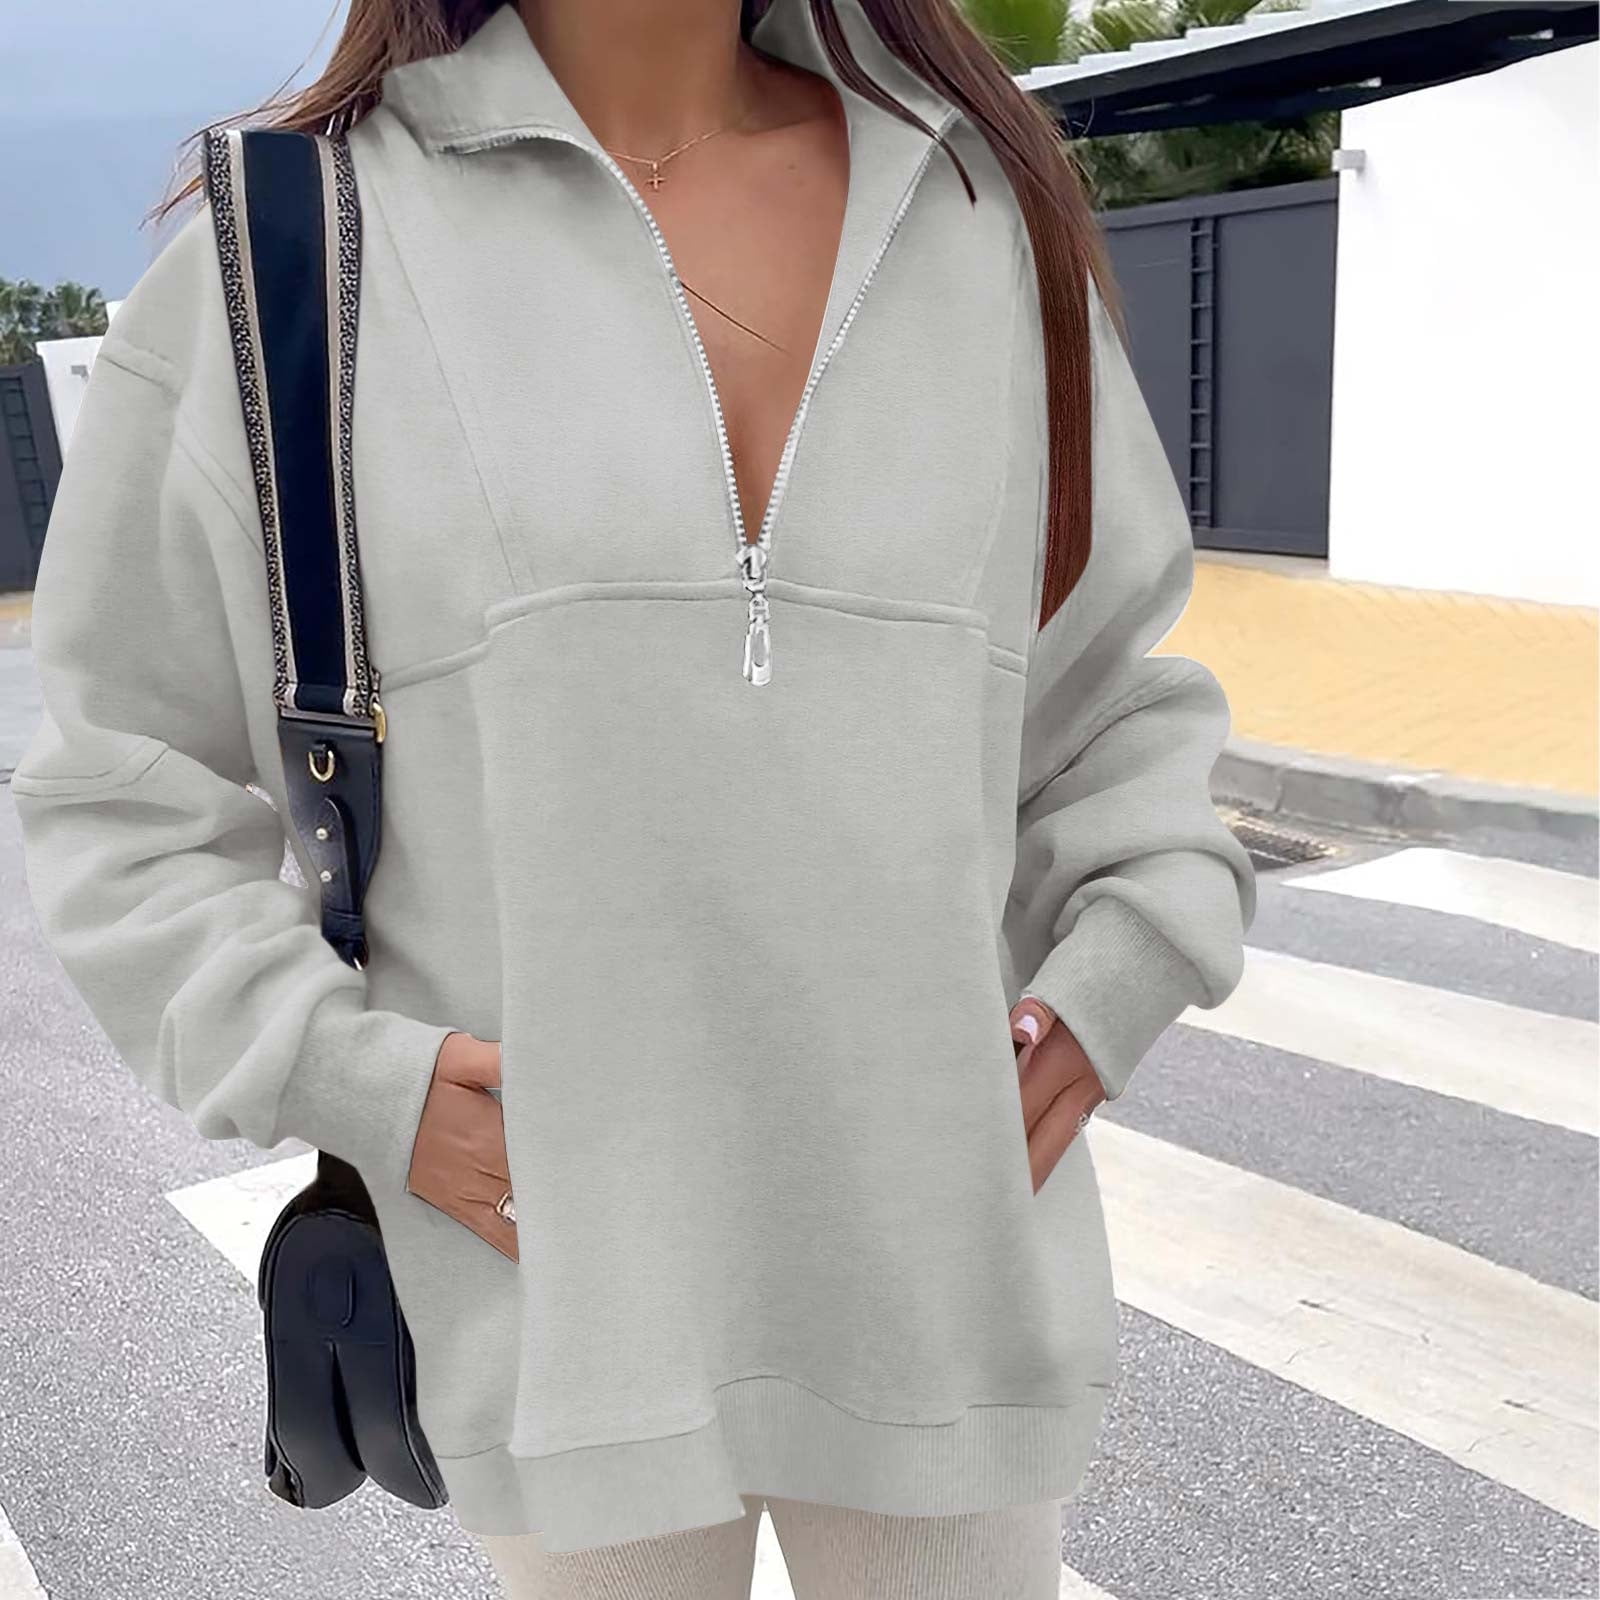 Jacenvly Sweatshirts For Women Clearance Long Sleeve Solid Lapel